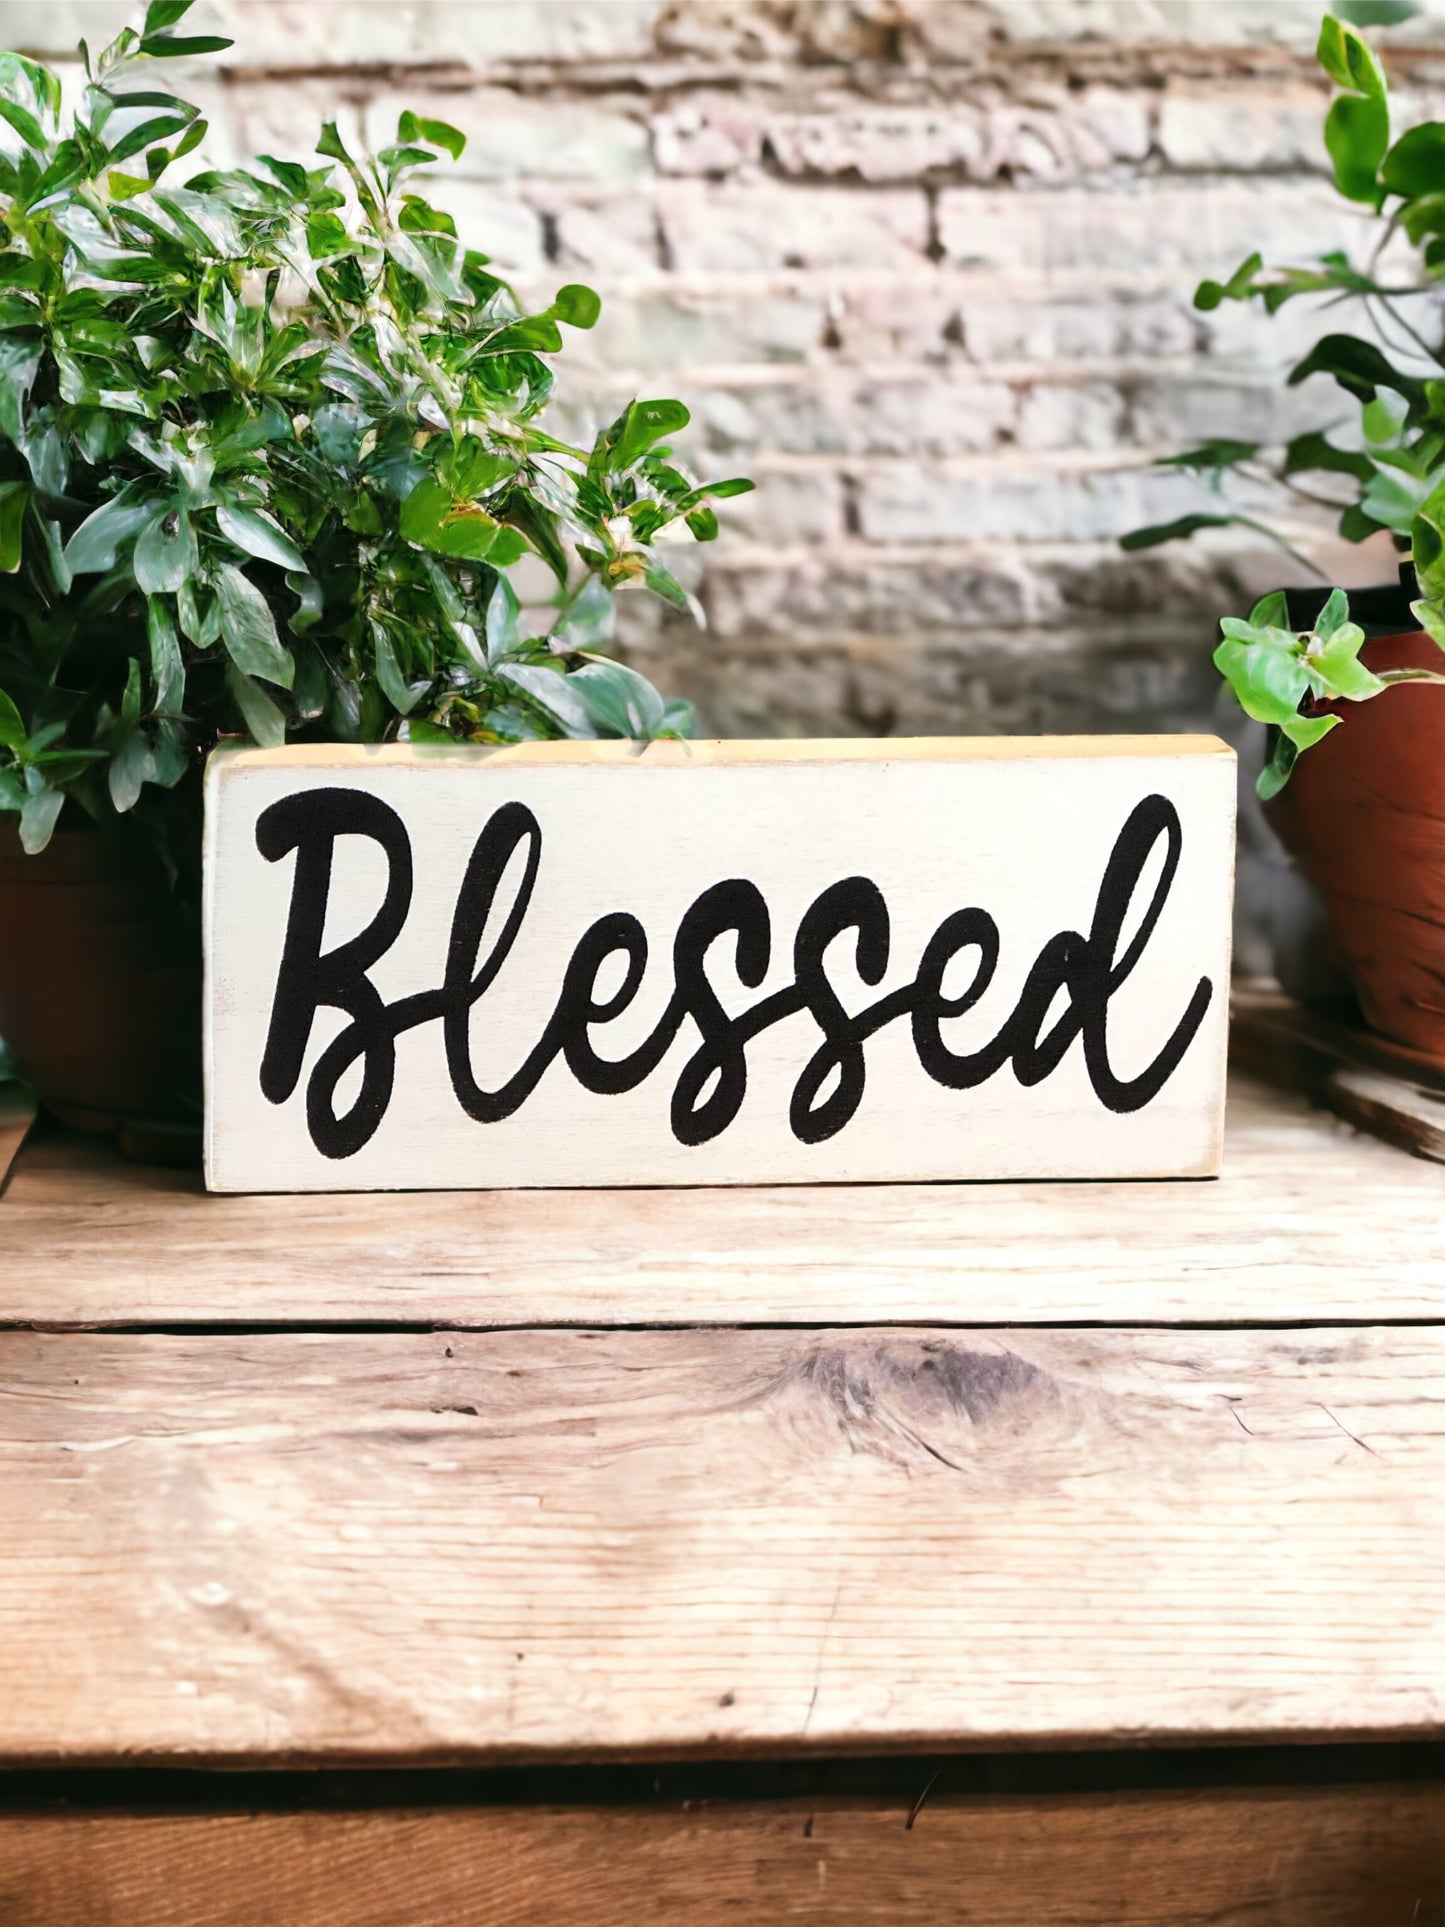 "Blessed" wood sign